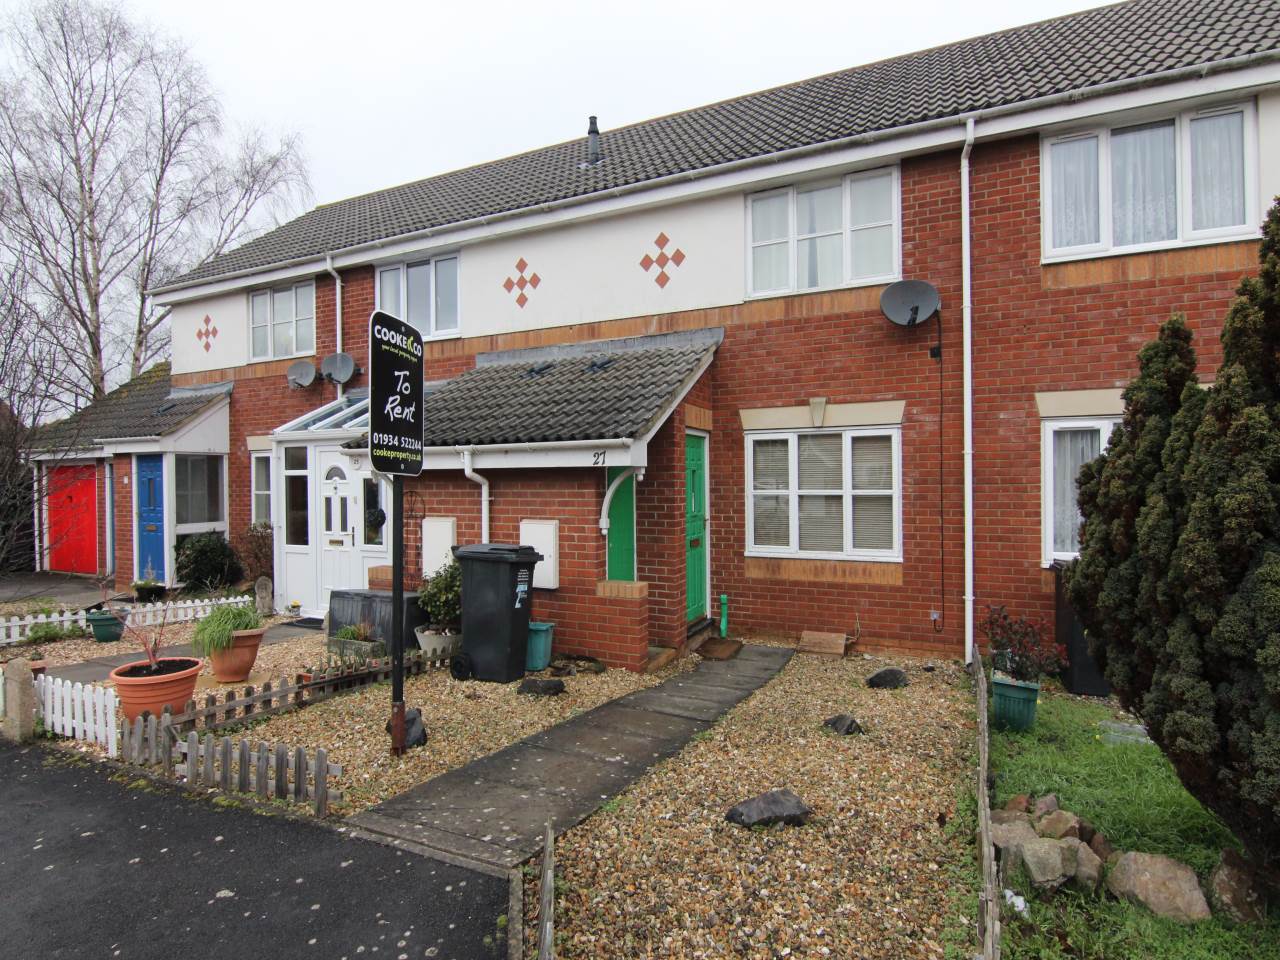 2 bed House (unspecified) for rent in Kewstoke. From Cooke & Co - Weston-Super-Mare